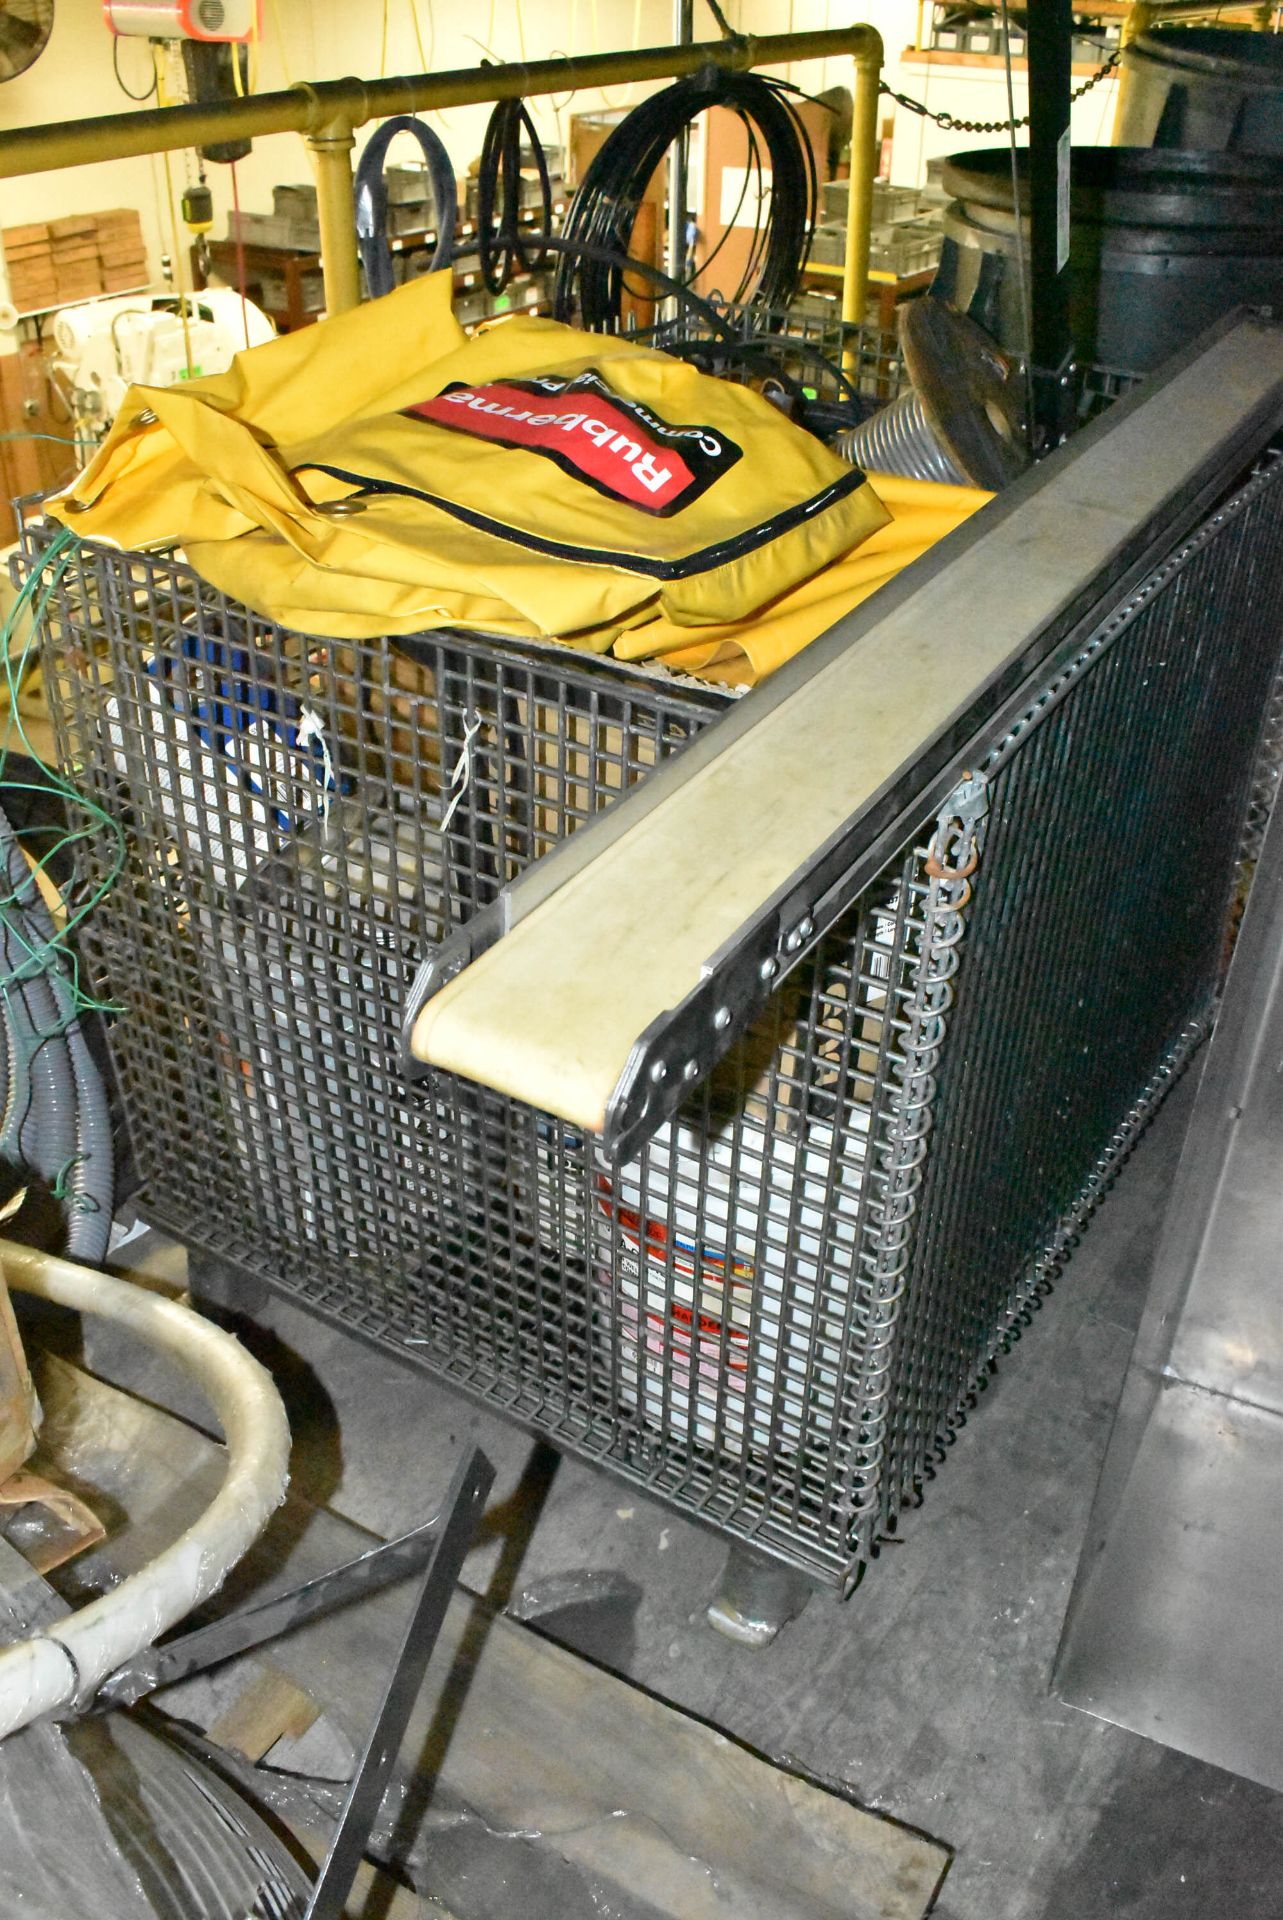 LOT/ WIRE MESH BIN WITH CONTENTS - INCLUDING SHOP BOX, ELECTRICAL CABLE, PORTABLE BELT CONVEYOR, - Image 3 of 3